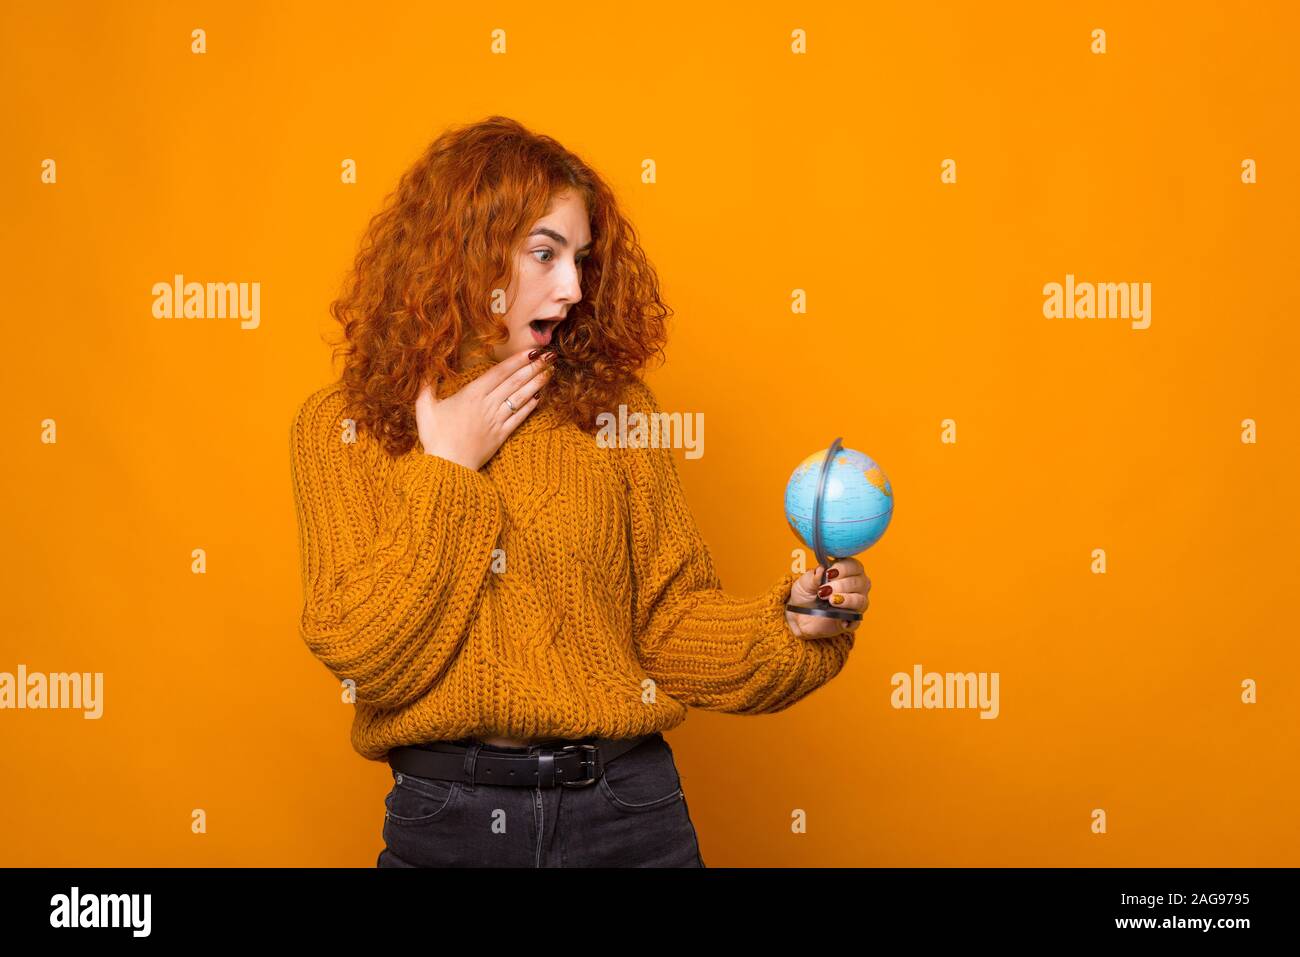 Young woman is looking surprised at globe on orange wall. Stock Photo